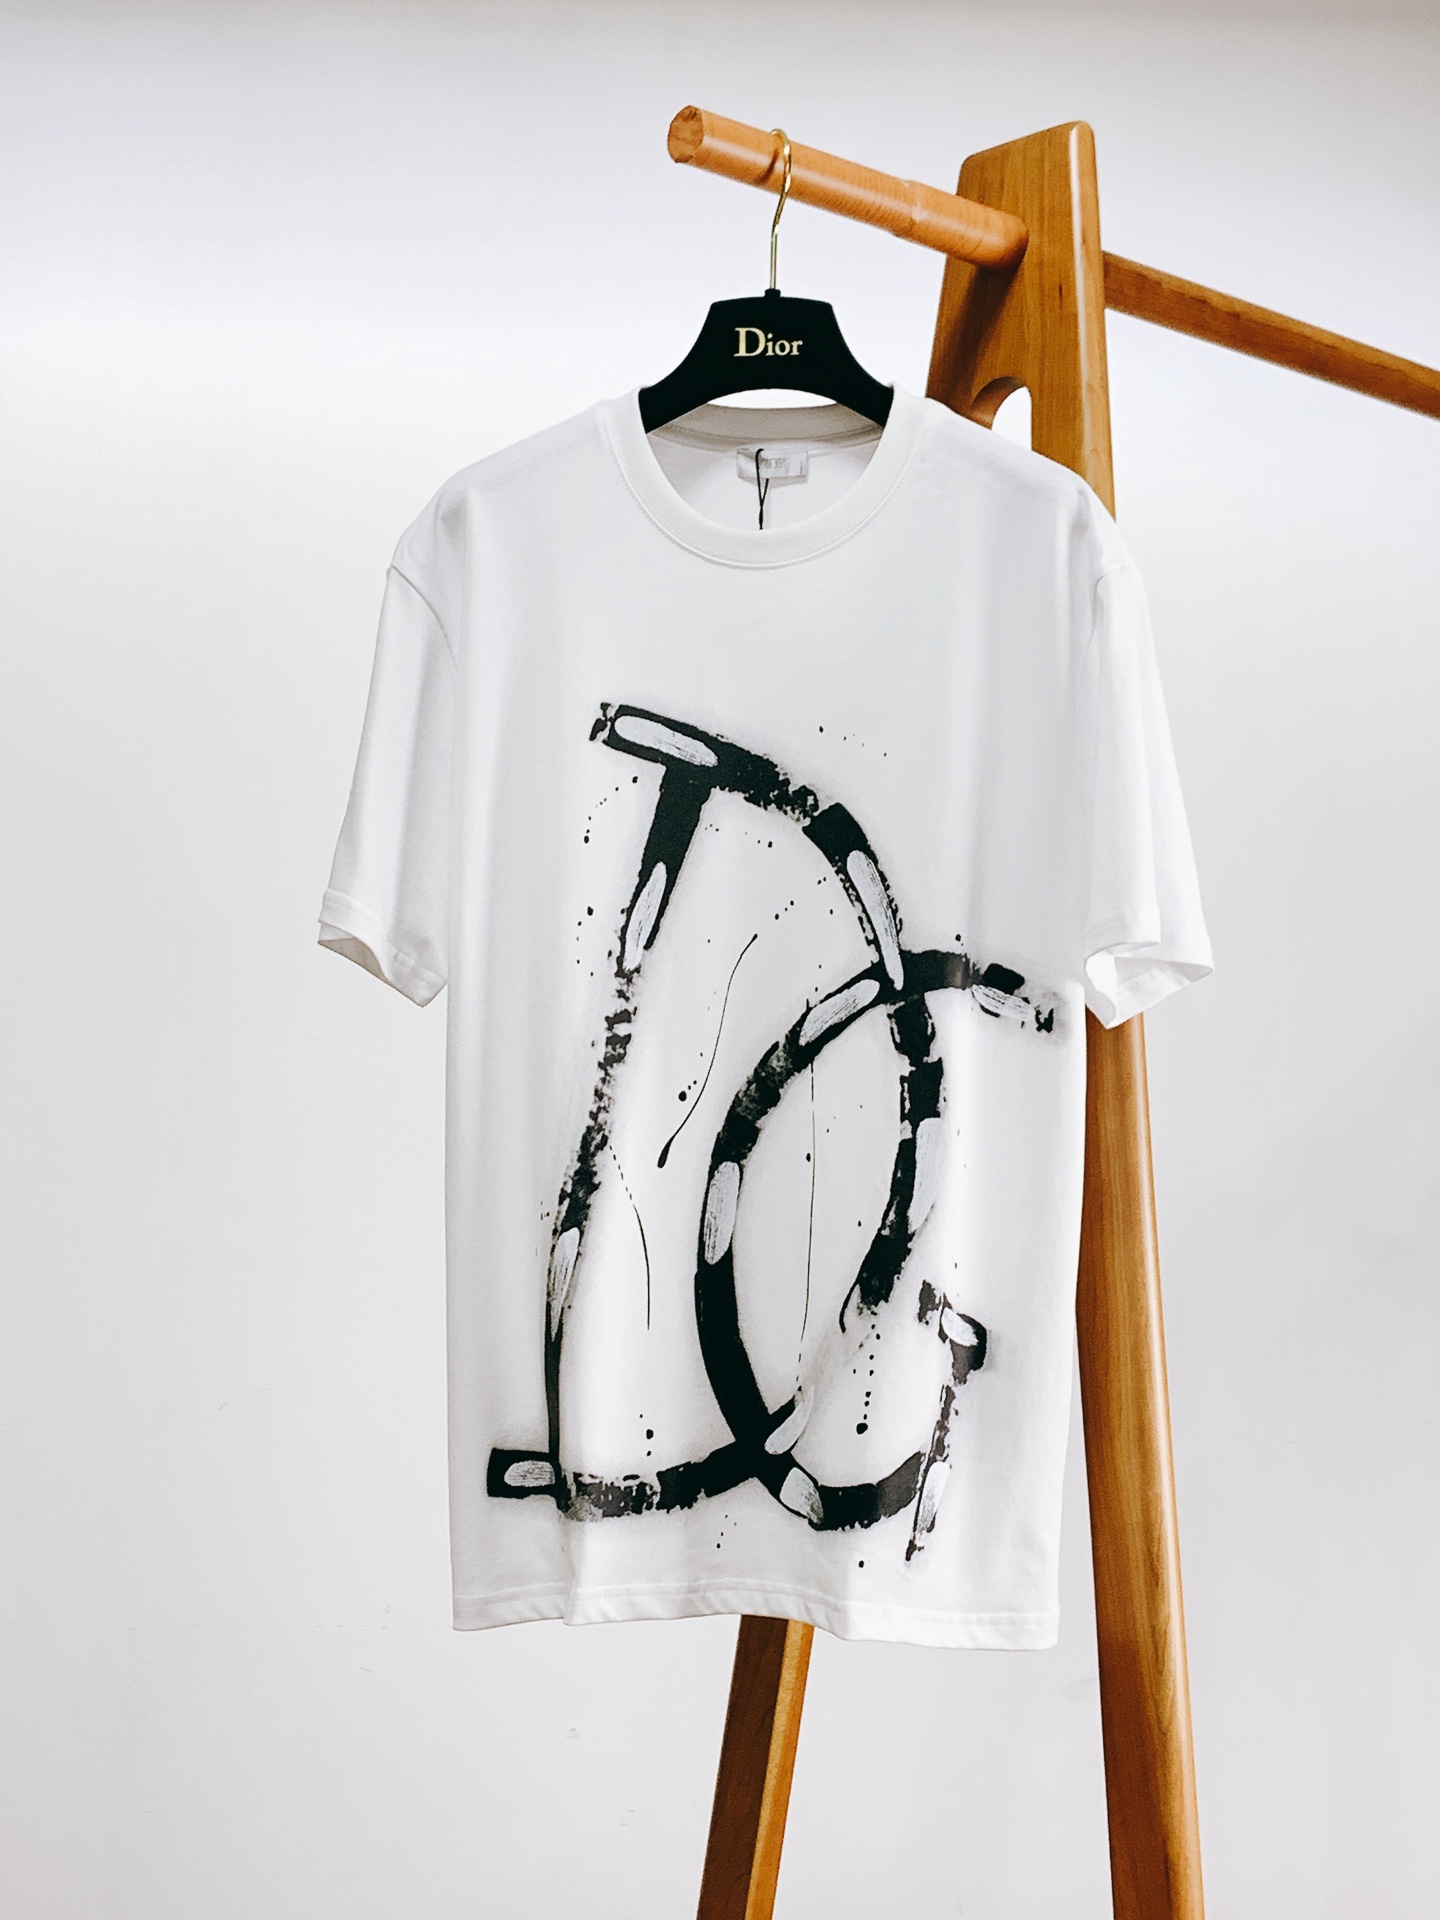 Dior Clothing T-Shirt Doodle White Printing Unisex Cotton Knitted Knitting Spring/Summer Collection